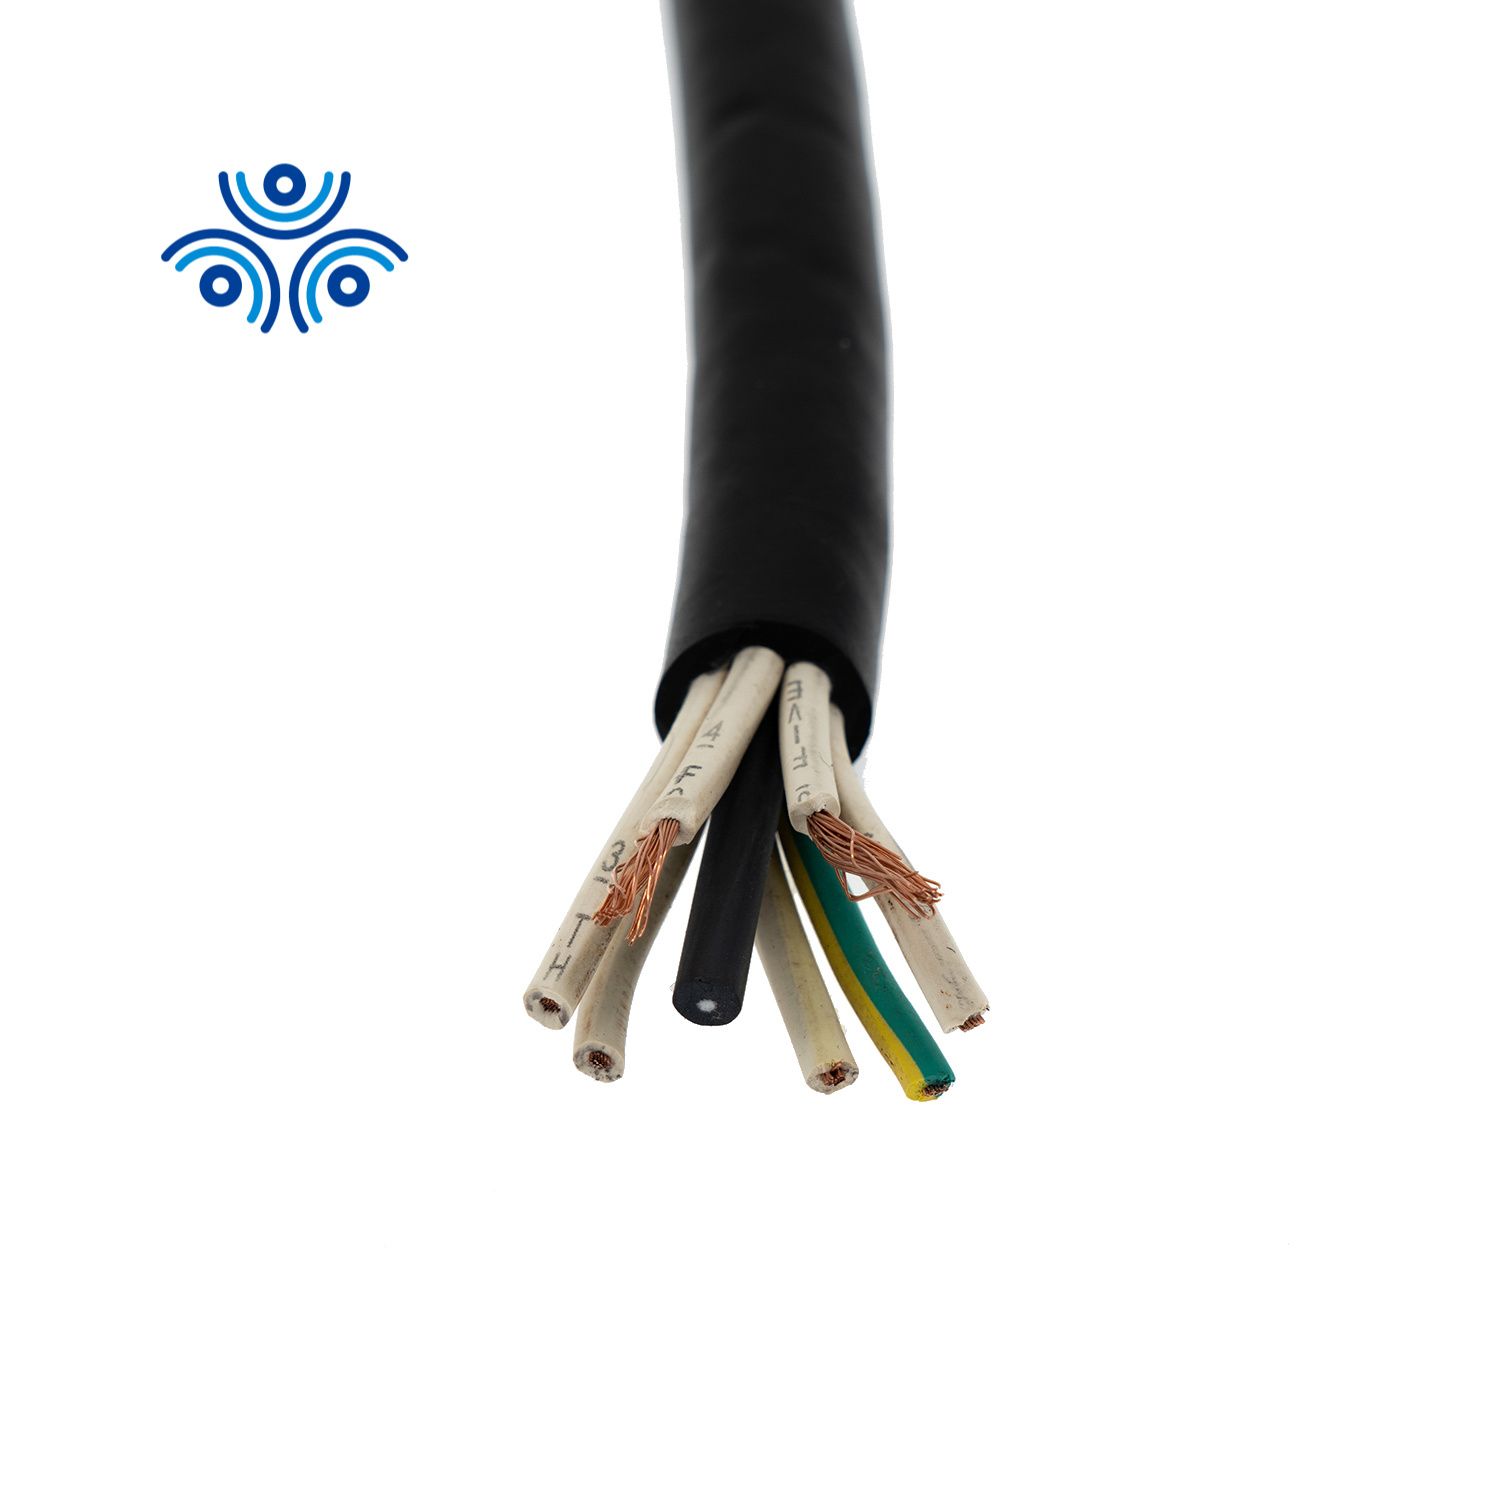 Heavy-Duty Service Rubber Sheathed Flexible Cable Soow Sjoow 14 12 8 6 AWG